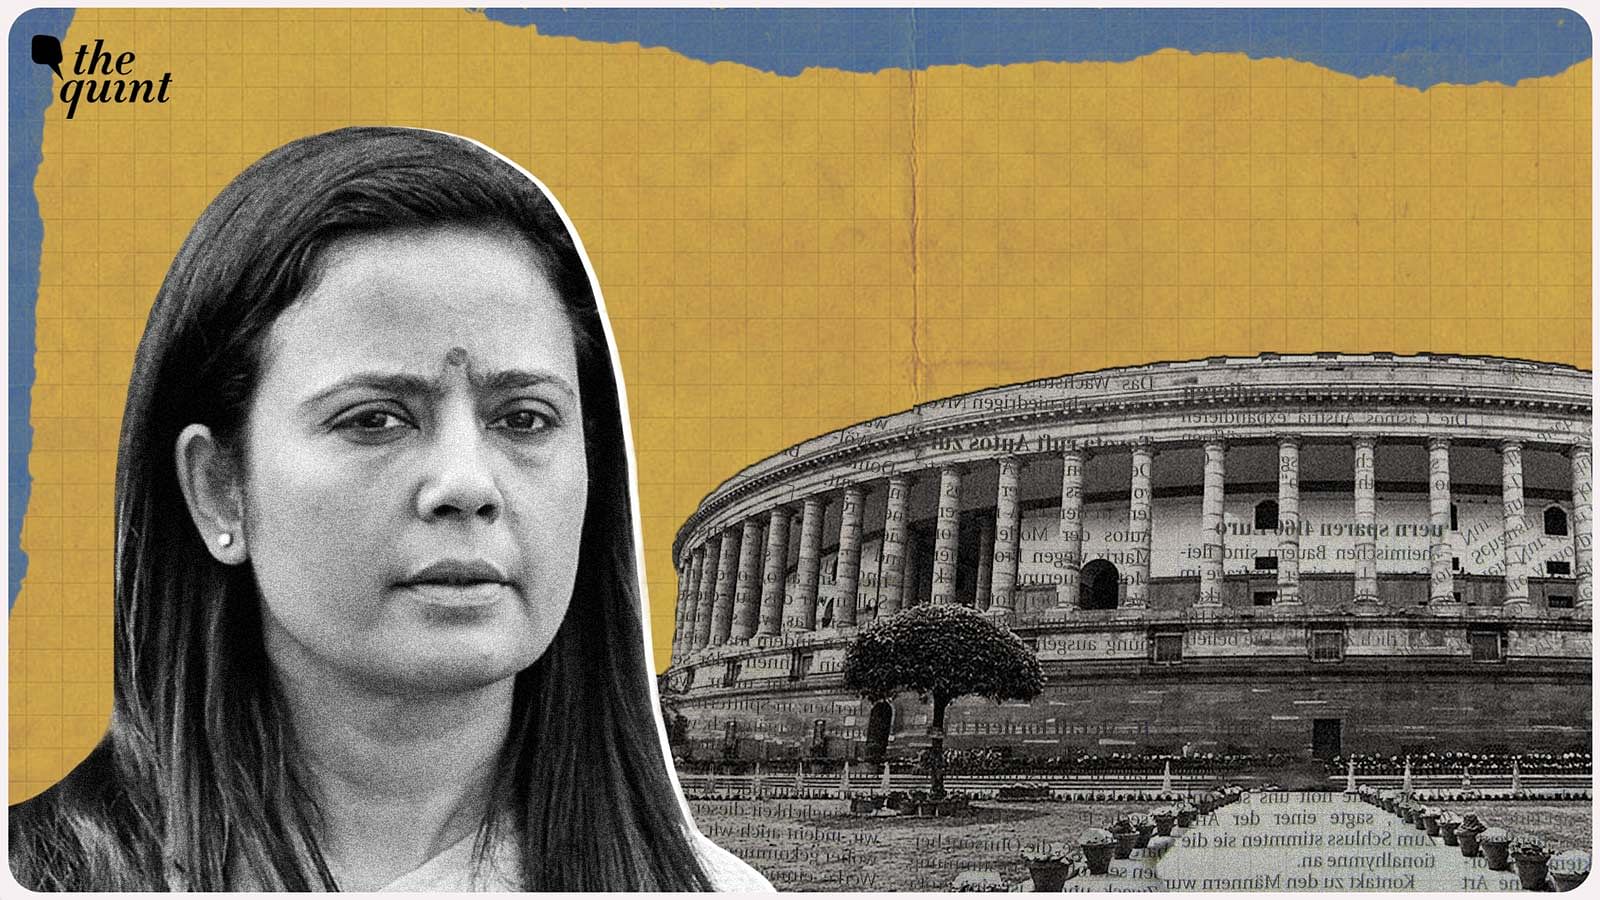 Yet to get letter': Ethics panel head on businessman charge against Mahua  Moitra - India Today